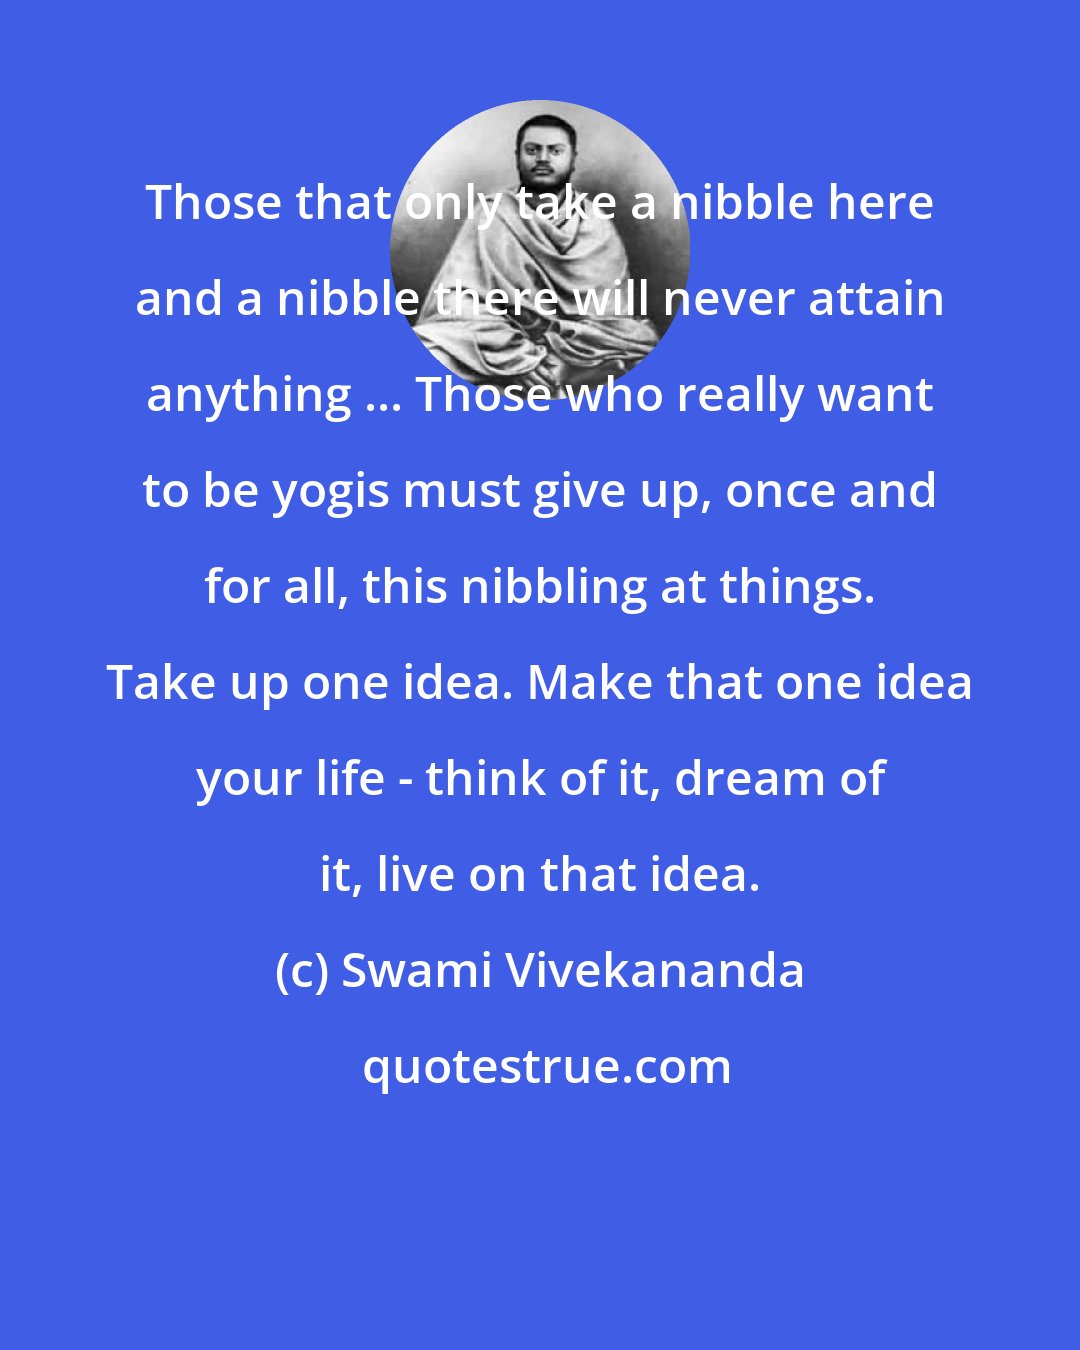 Swami Vivekananda: Those that only take a nibble here and a nibble there will never attain anything ... Those who really want to be yogis must give up, once and for all, this nibbling at things. Take up one idea. Make that one idea your life - think of it, dream of it, live on that idea.